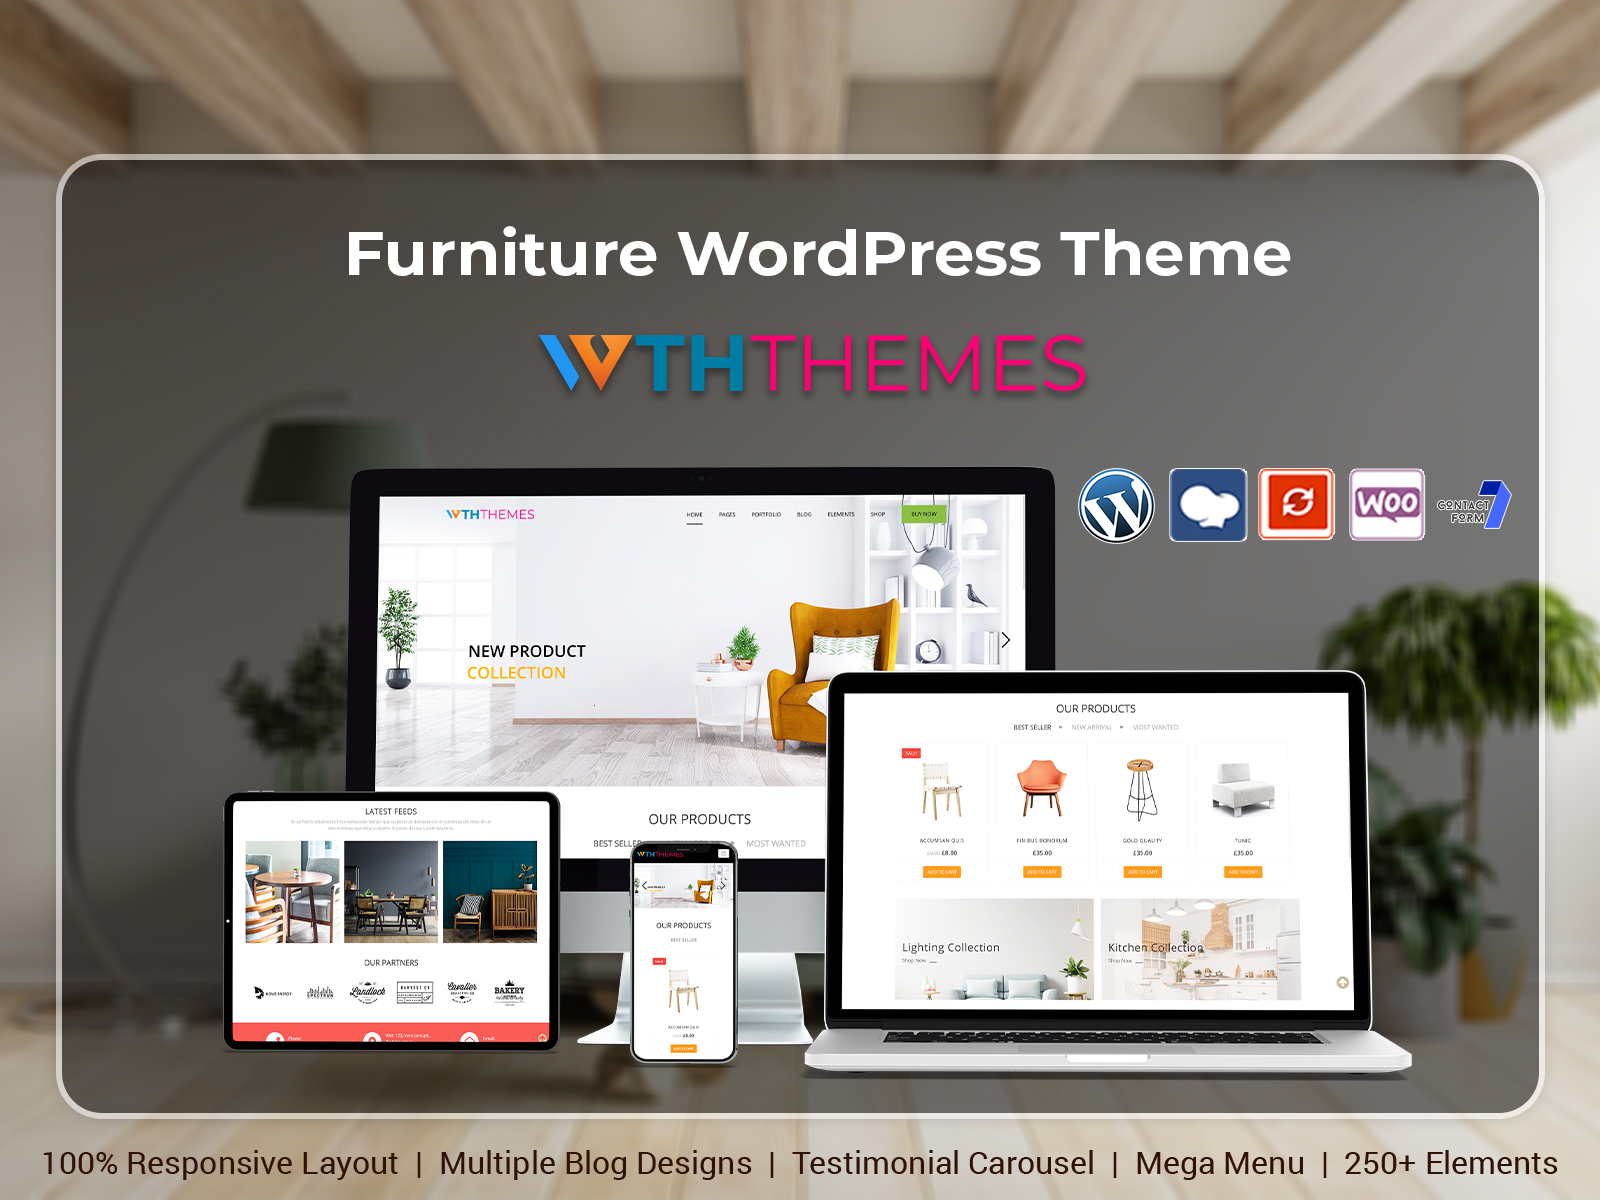 Modernize Your Furniture Website With A Corporate WordPress Theme